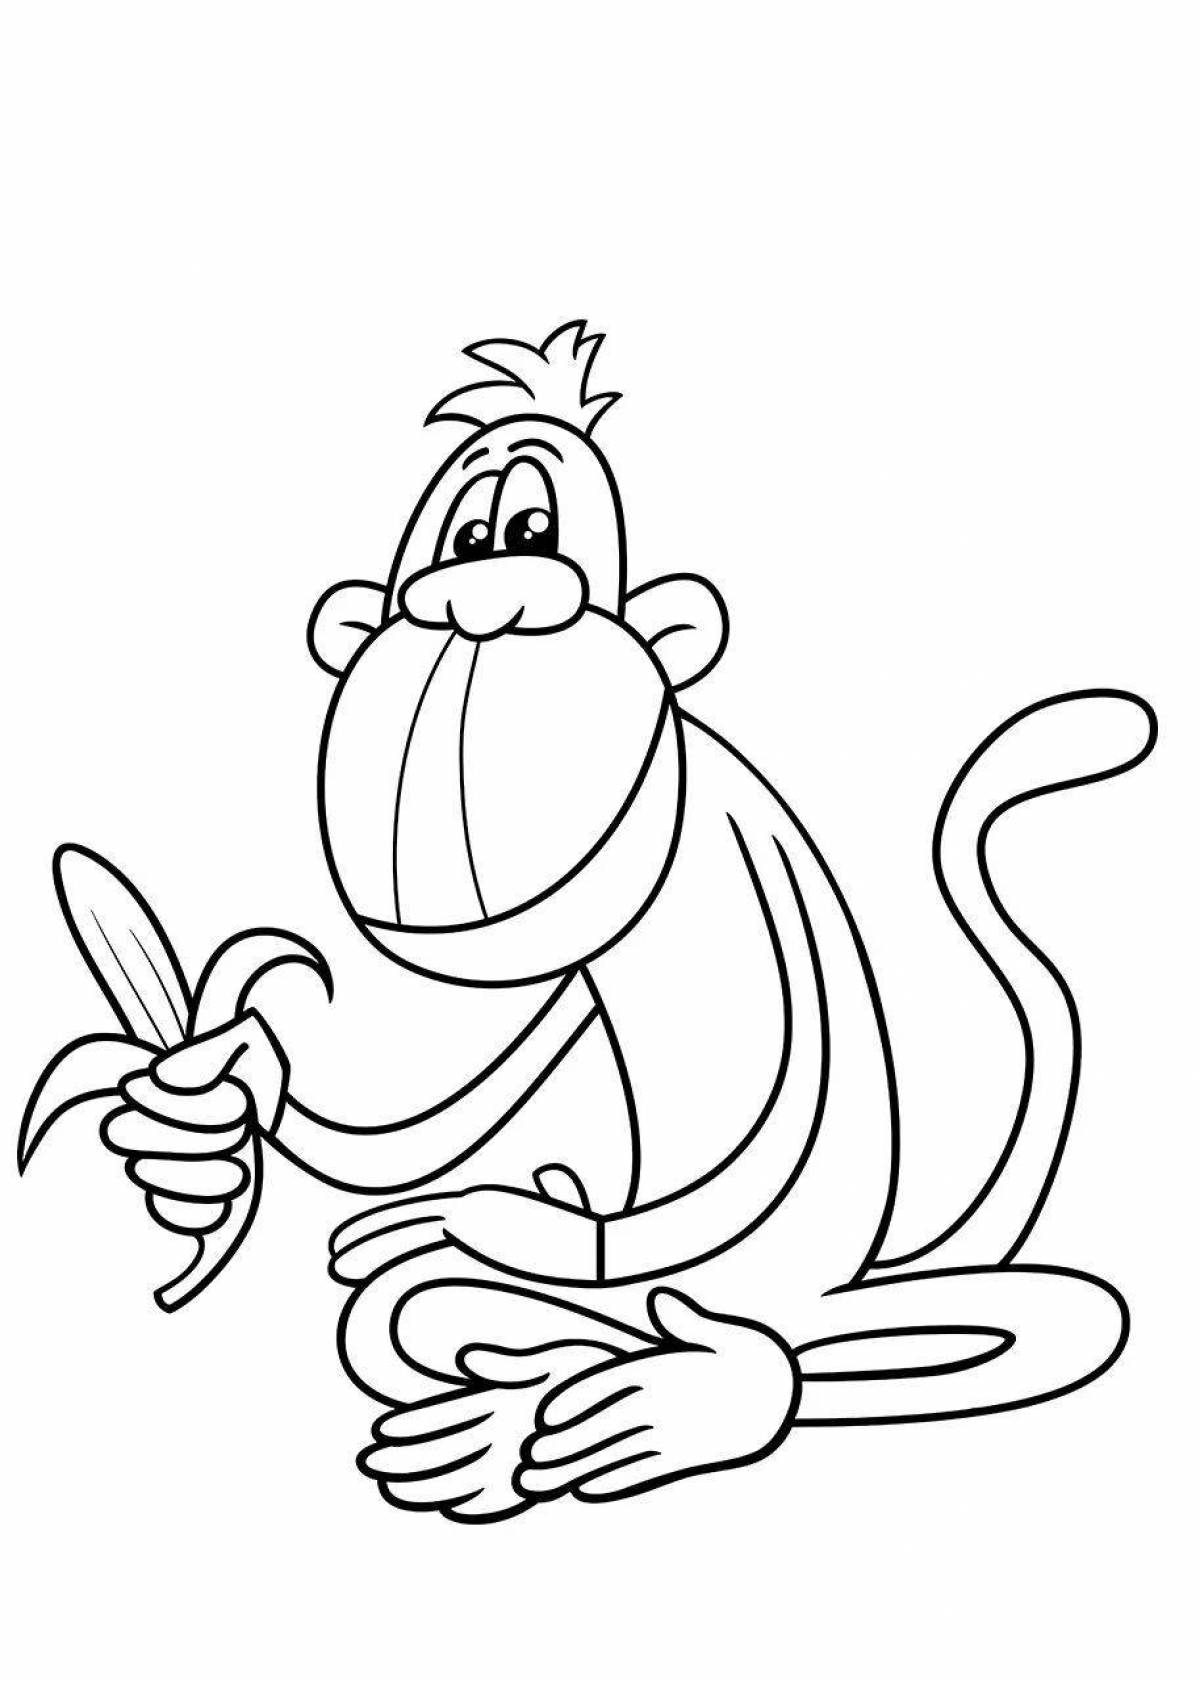 Coloring monkey with a banana